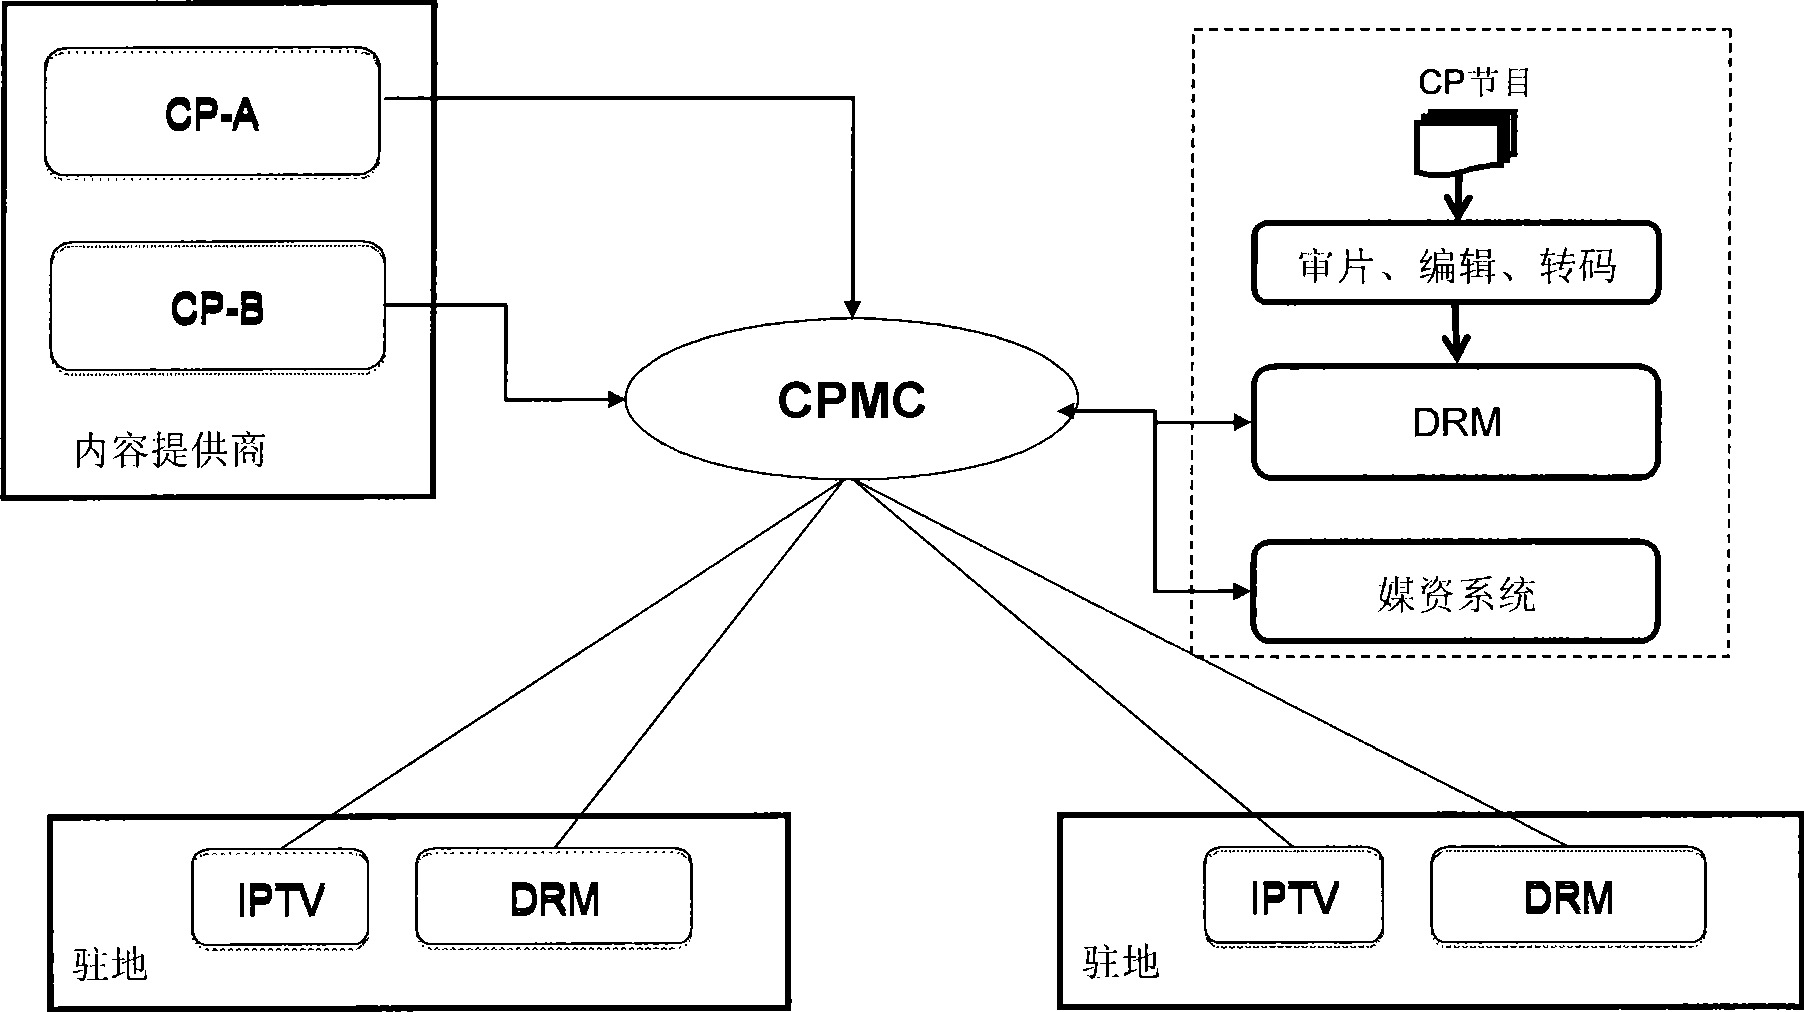 Content cooperative management system capable of being applied in IPTV and similar novel media